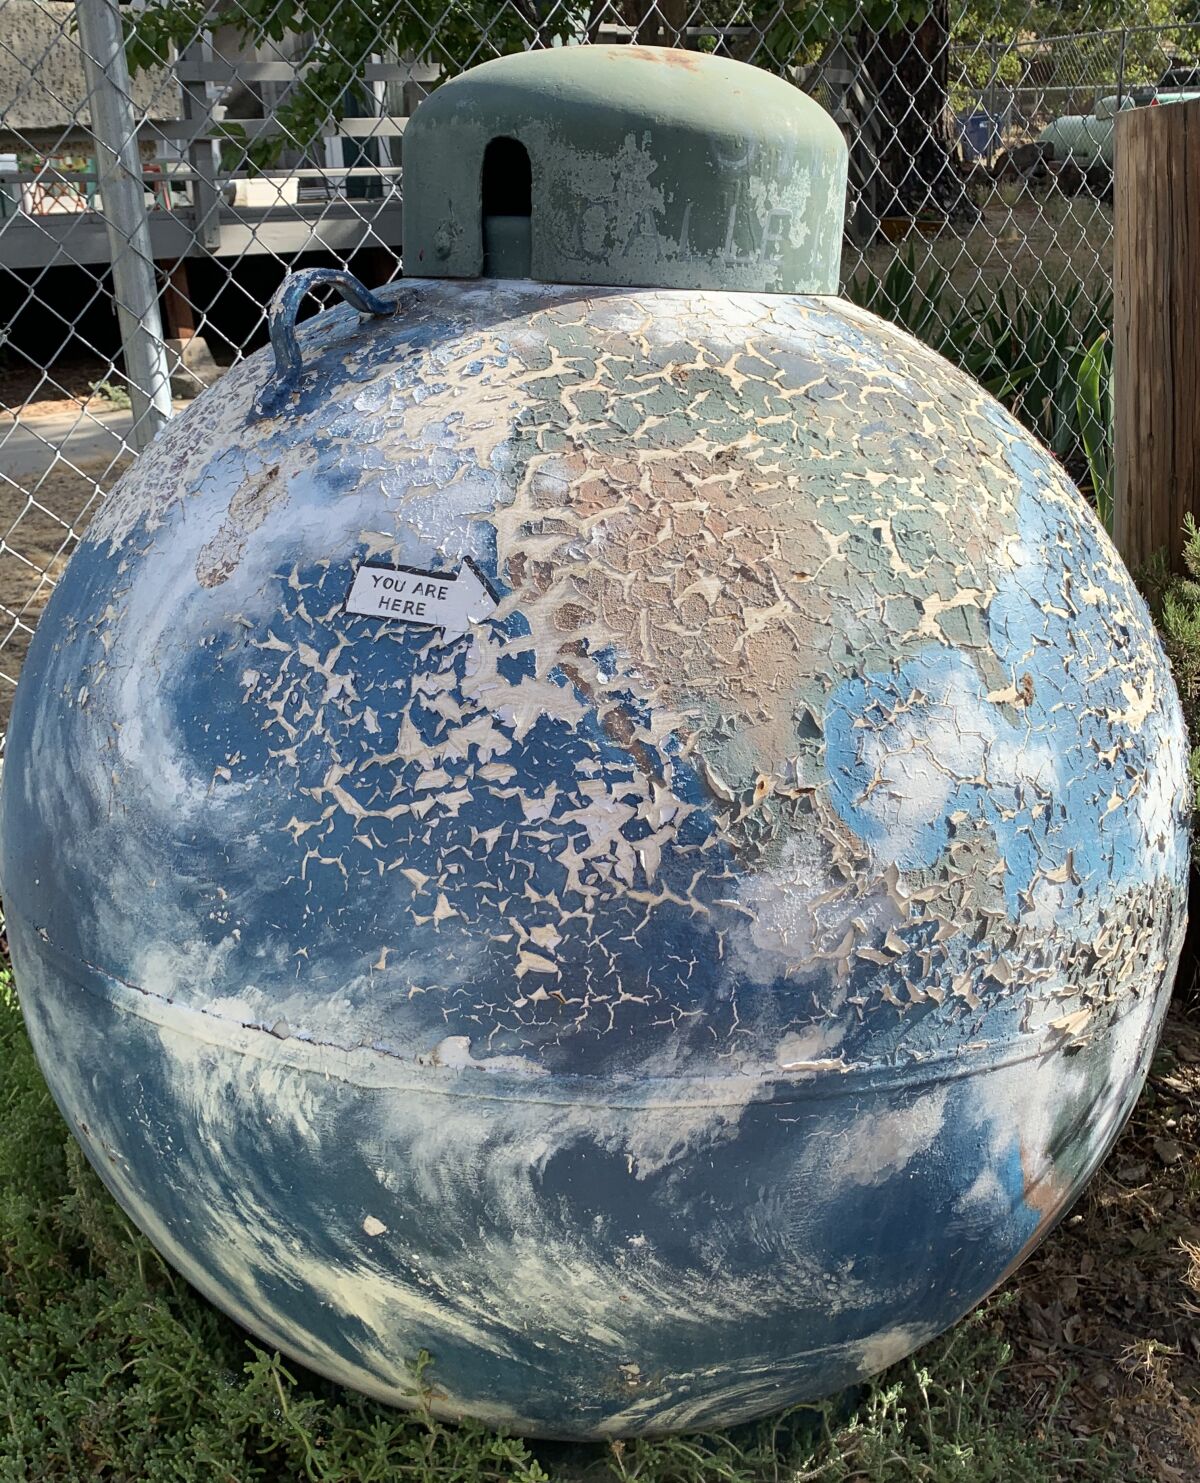 An arrow marks "You Are Here" on a spherical gas tank painted to look like Earth that is frayed and peeling.